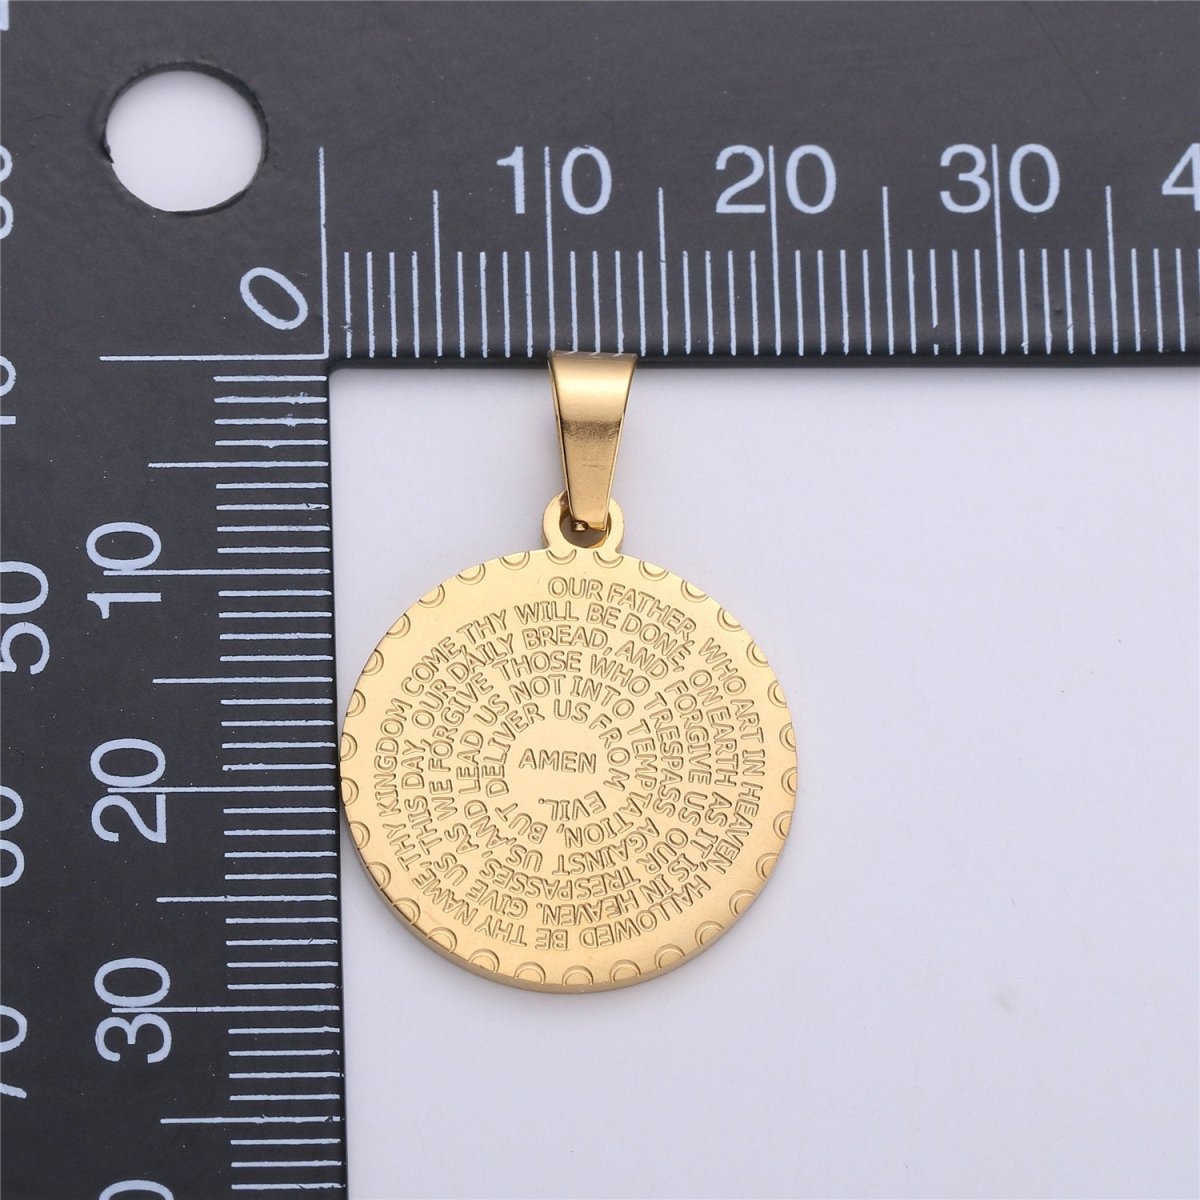 Dainty Gold Medallion Script Pendant Necklace, Father Prayer Pendant, Engraved Lords Prayer for Religious Jewelry Necklace Charm | J-768, J-769 - DLUXCA